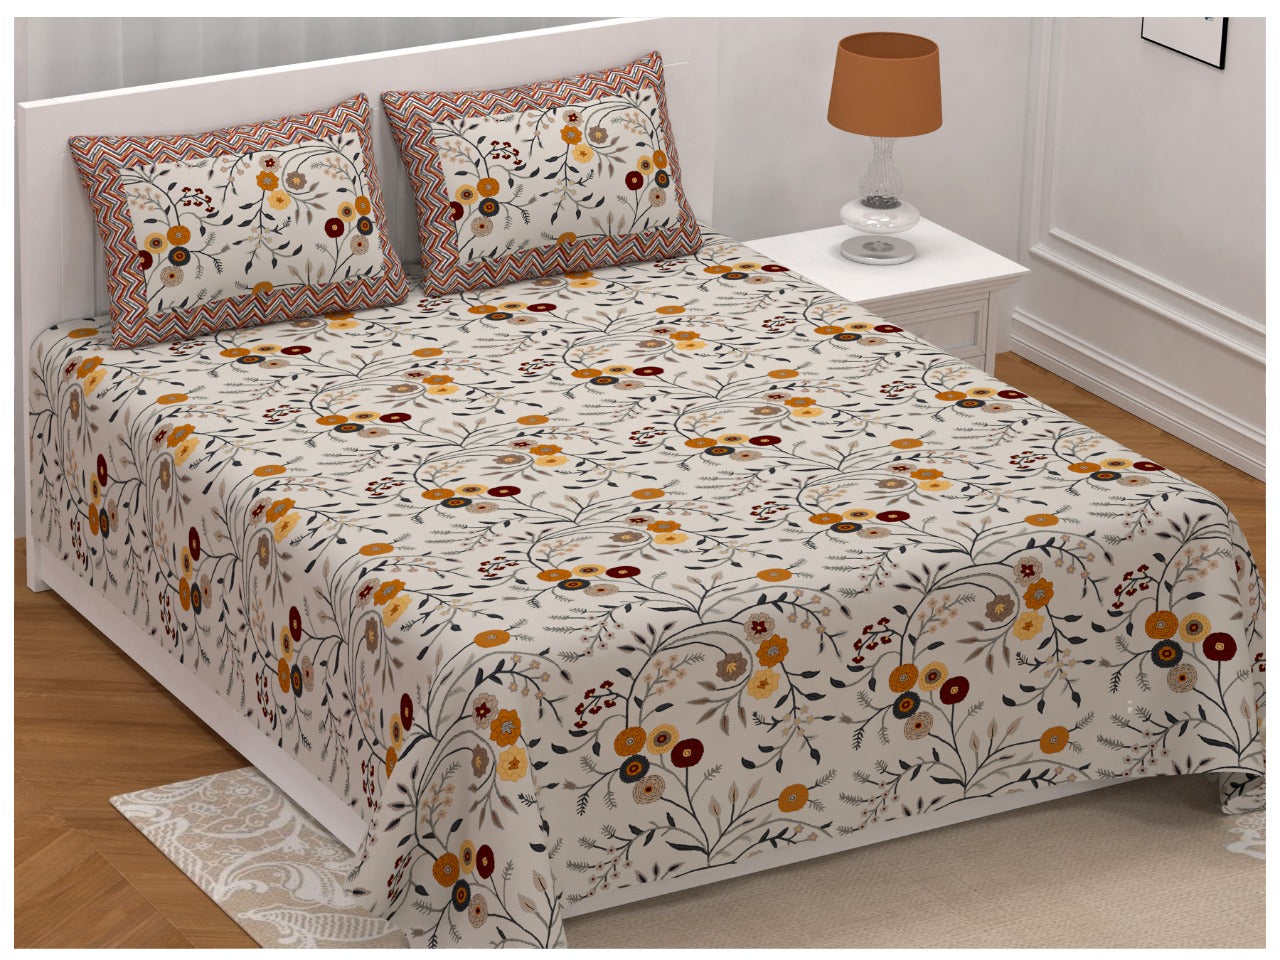 100% Pure Cotton King Size Double Bedsheet With 2 Pillow Covers ( 100 X 108 Inches ) - JBNBK41